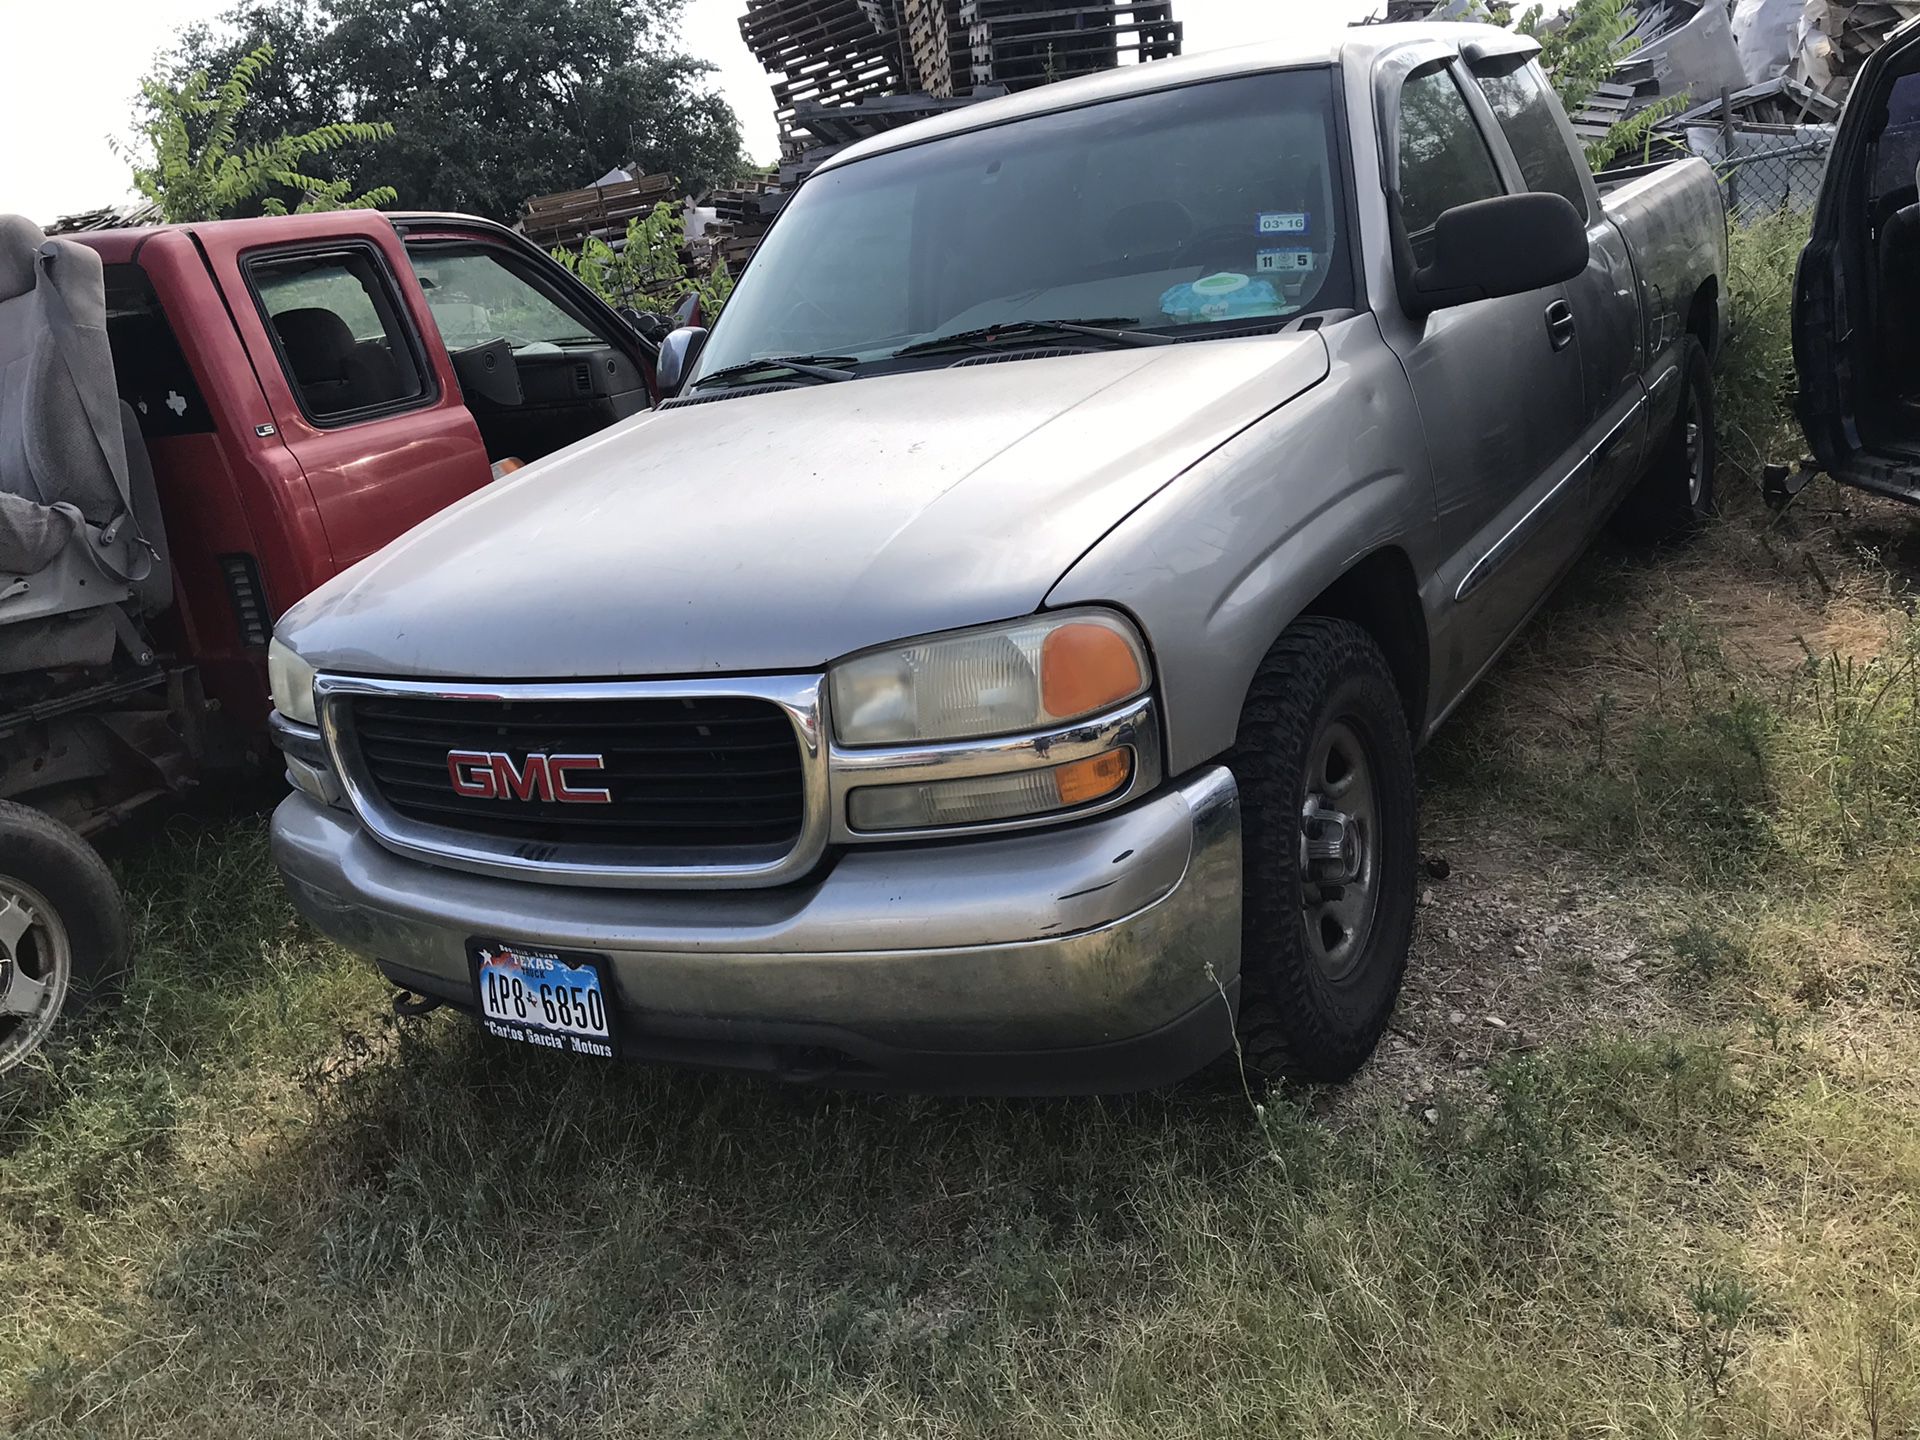 02 Sierra gmc FOR PARTS